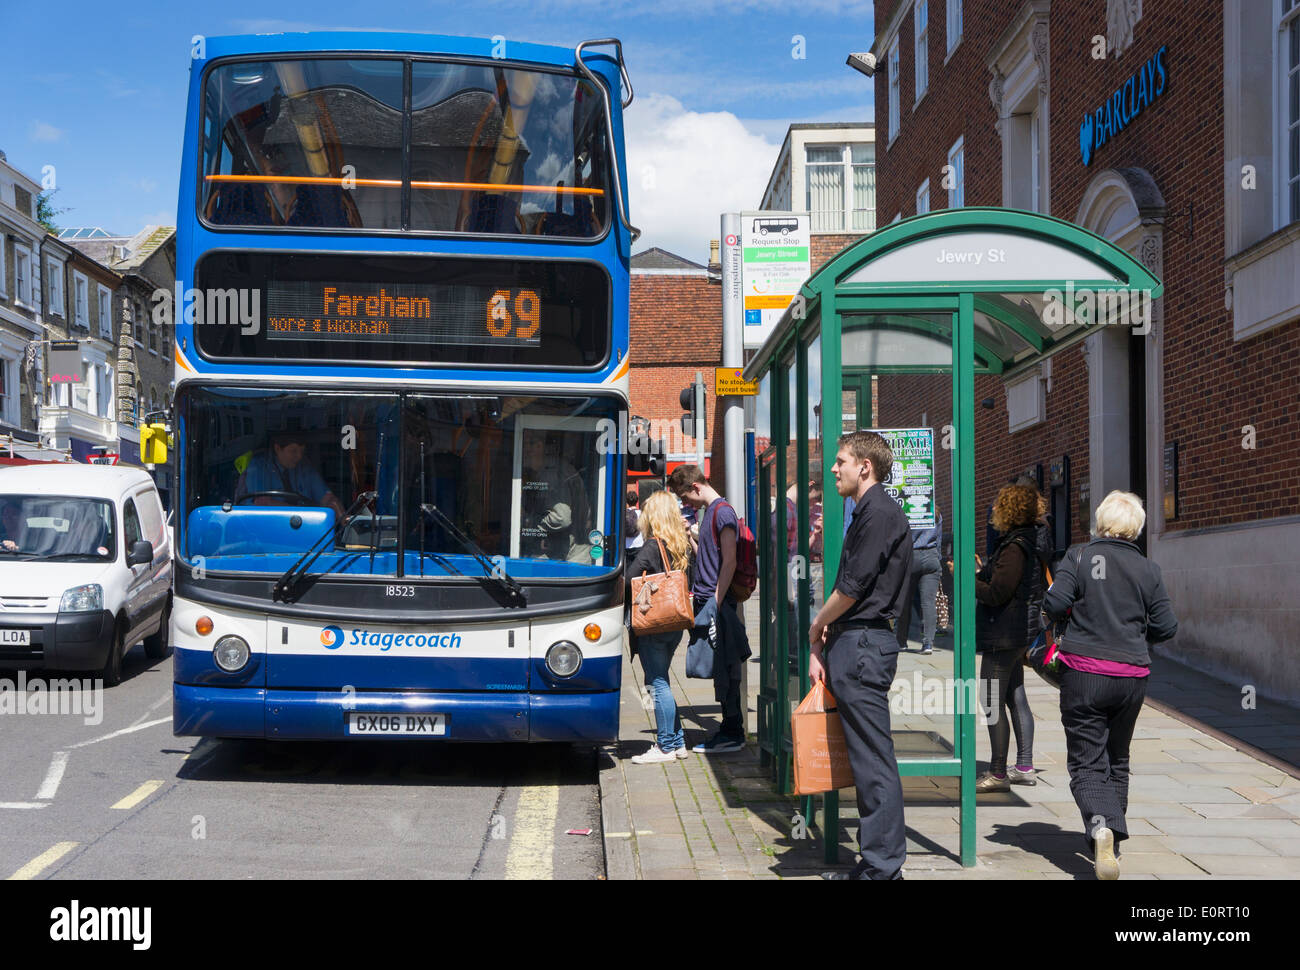 People boarding a bus at a bus stop, UK Stock Photo